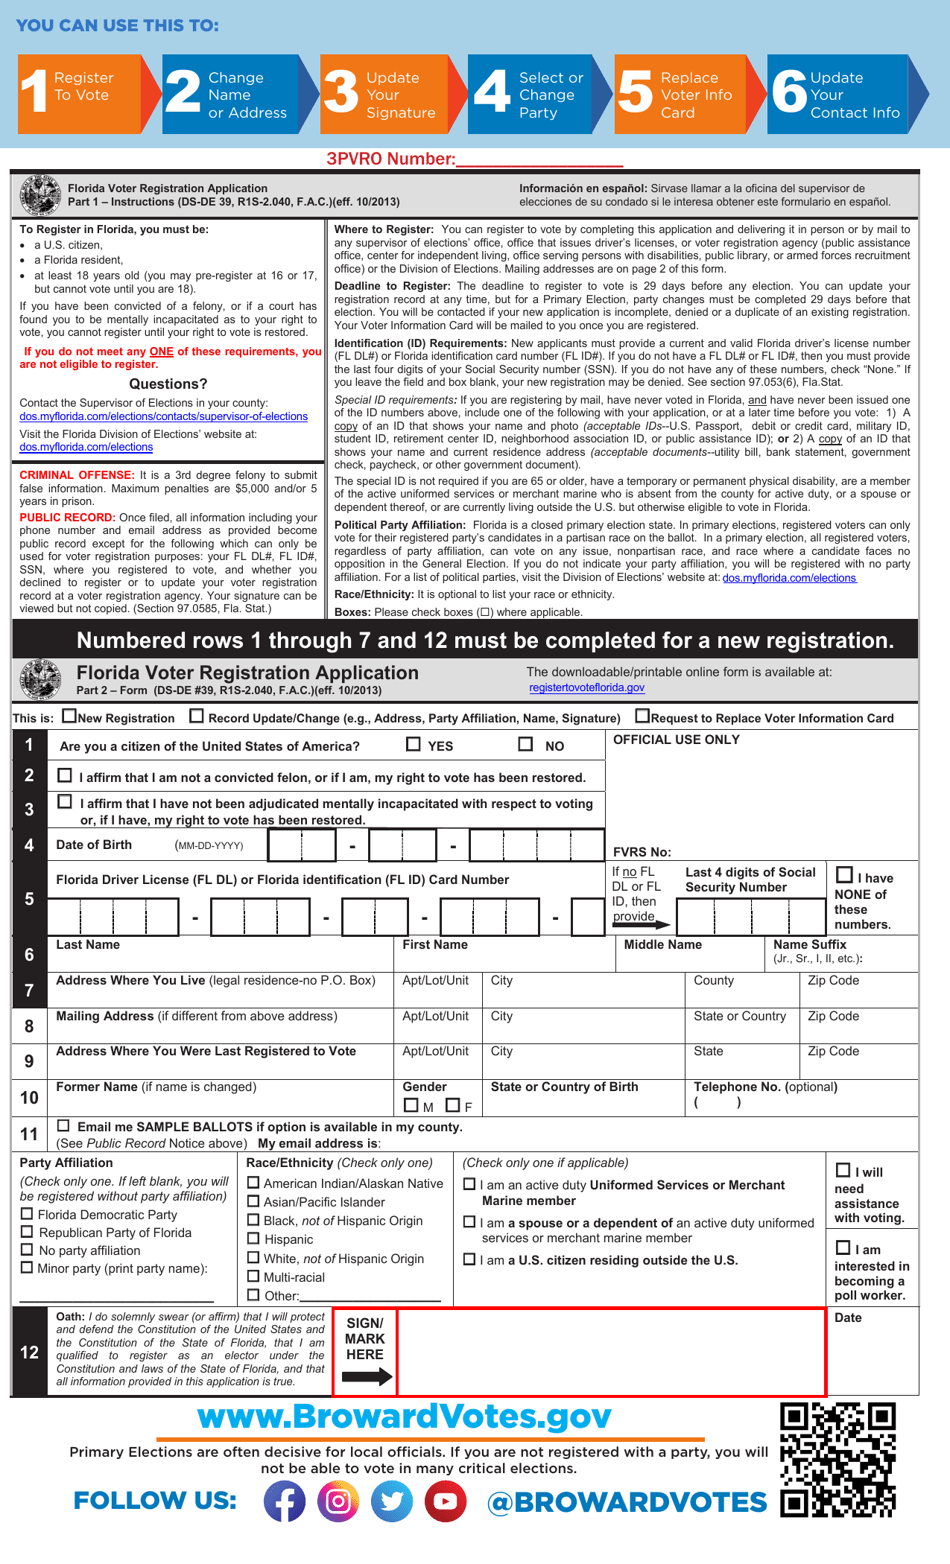 Voter Registration Form for the Third Party Voter Registration Organizations - Broward County, Florida, Page 1